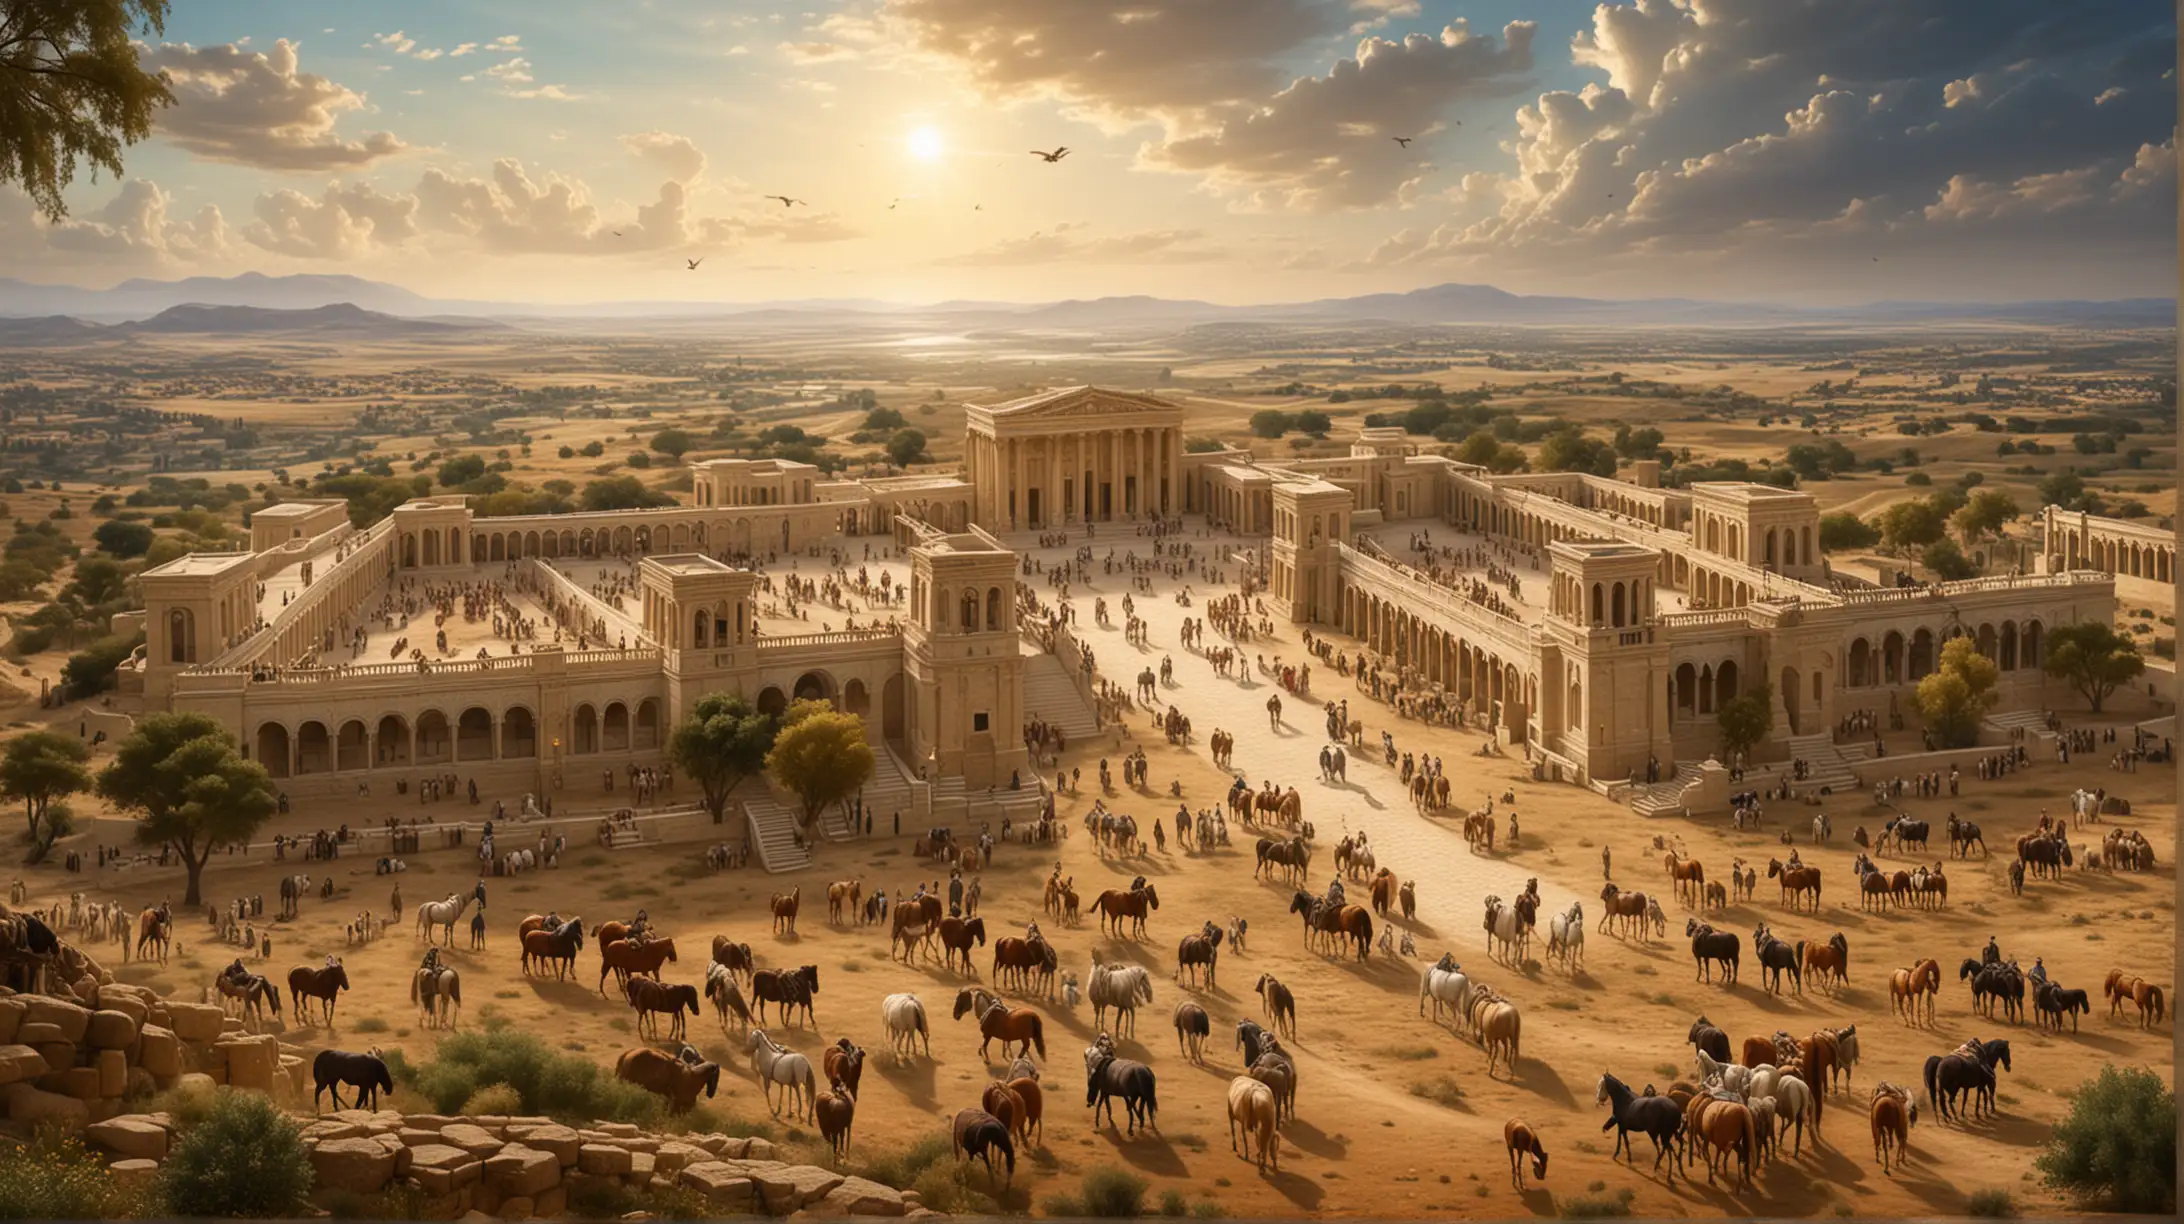 a scene of a Kingdom with abundance . Land, a palace, horses,  Set during the biblical era of King Solomon.